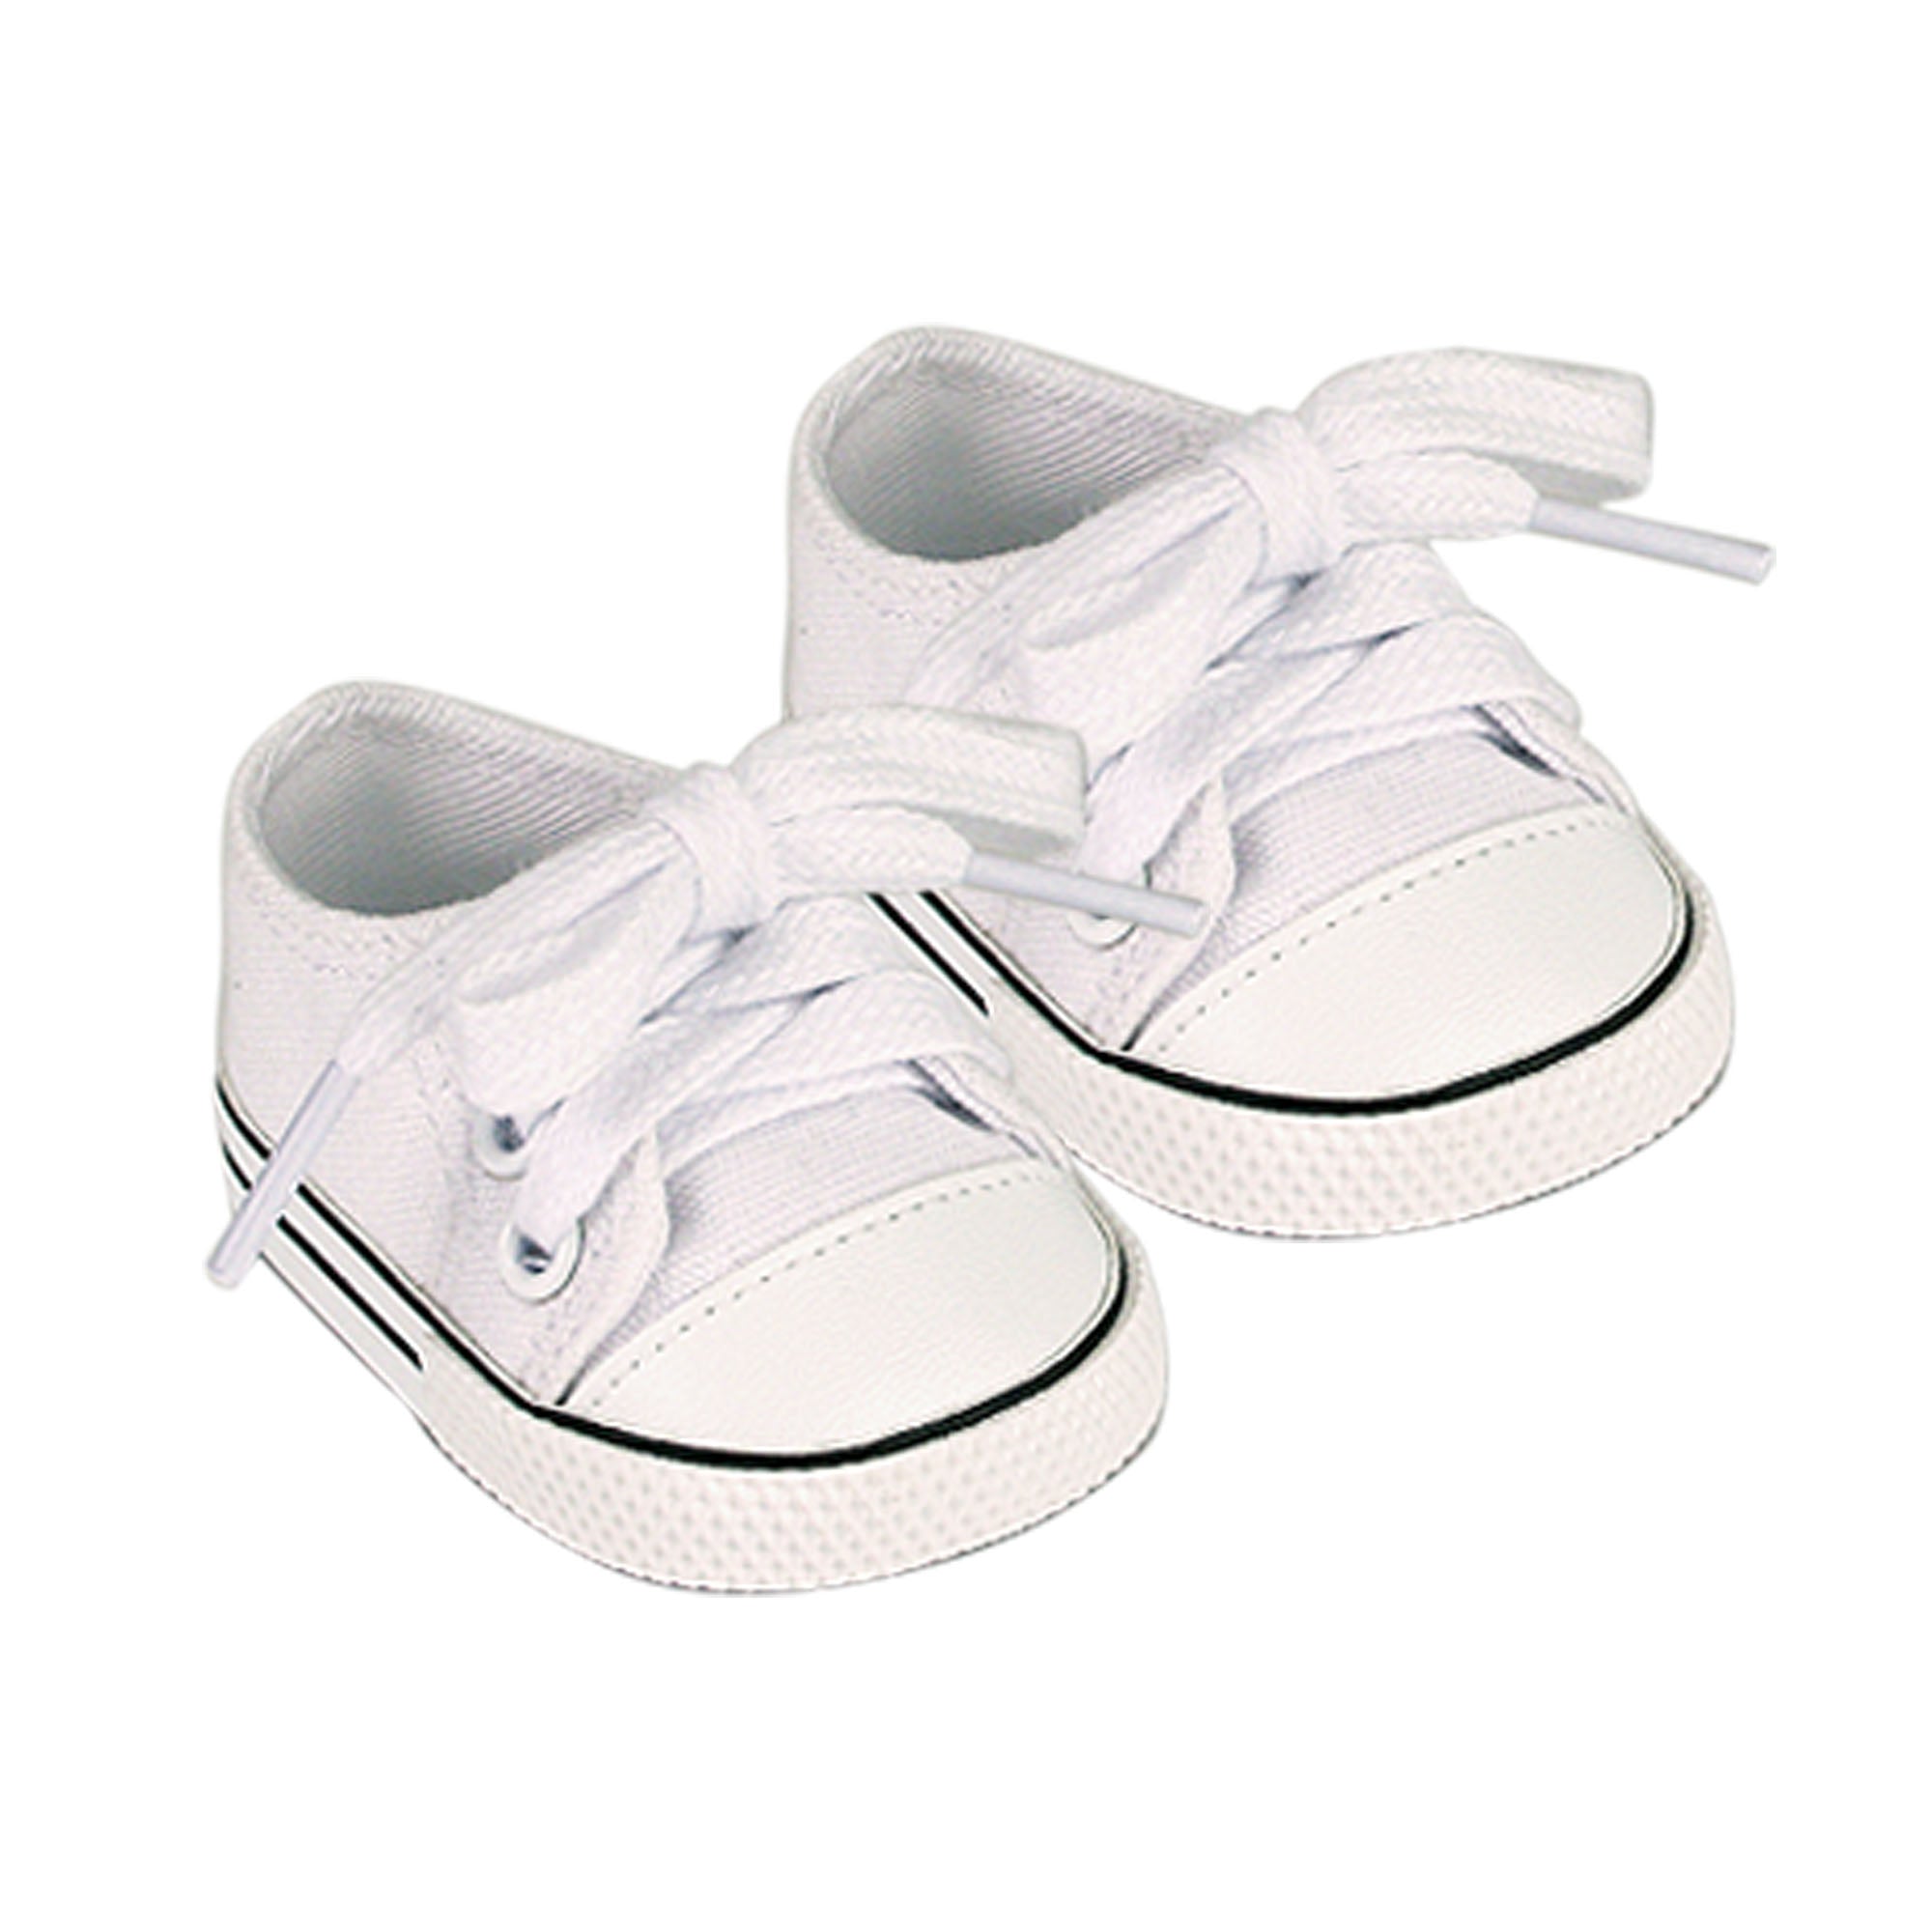 Sophia’s White Canvas Sneaker Shoes with Laces for 18" Dolls